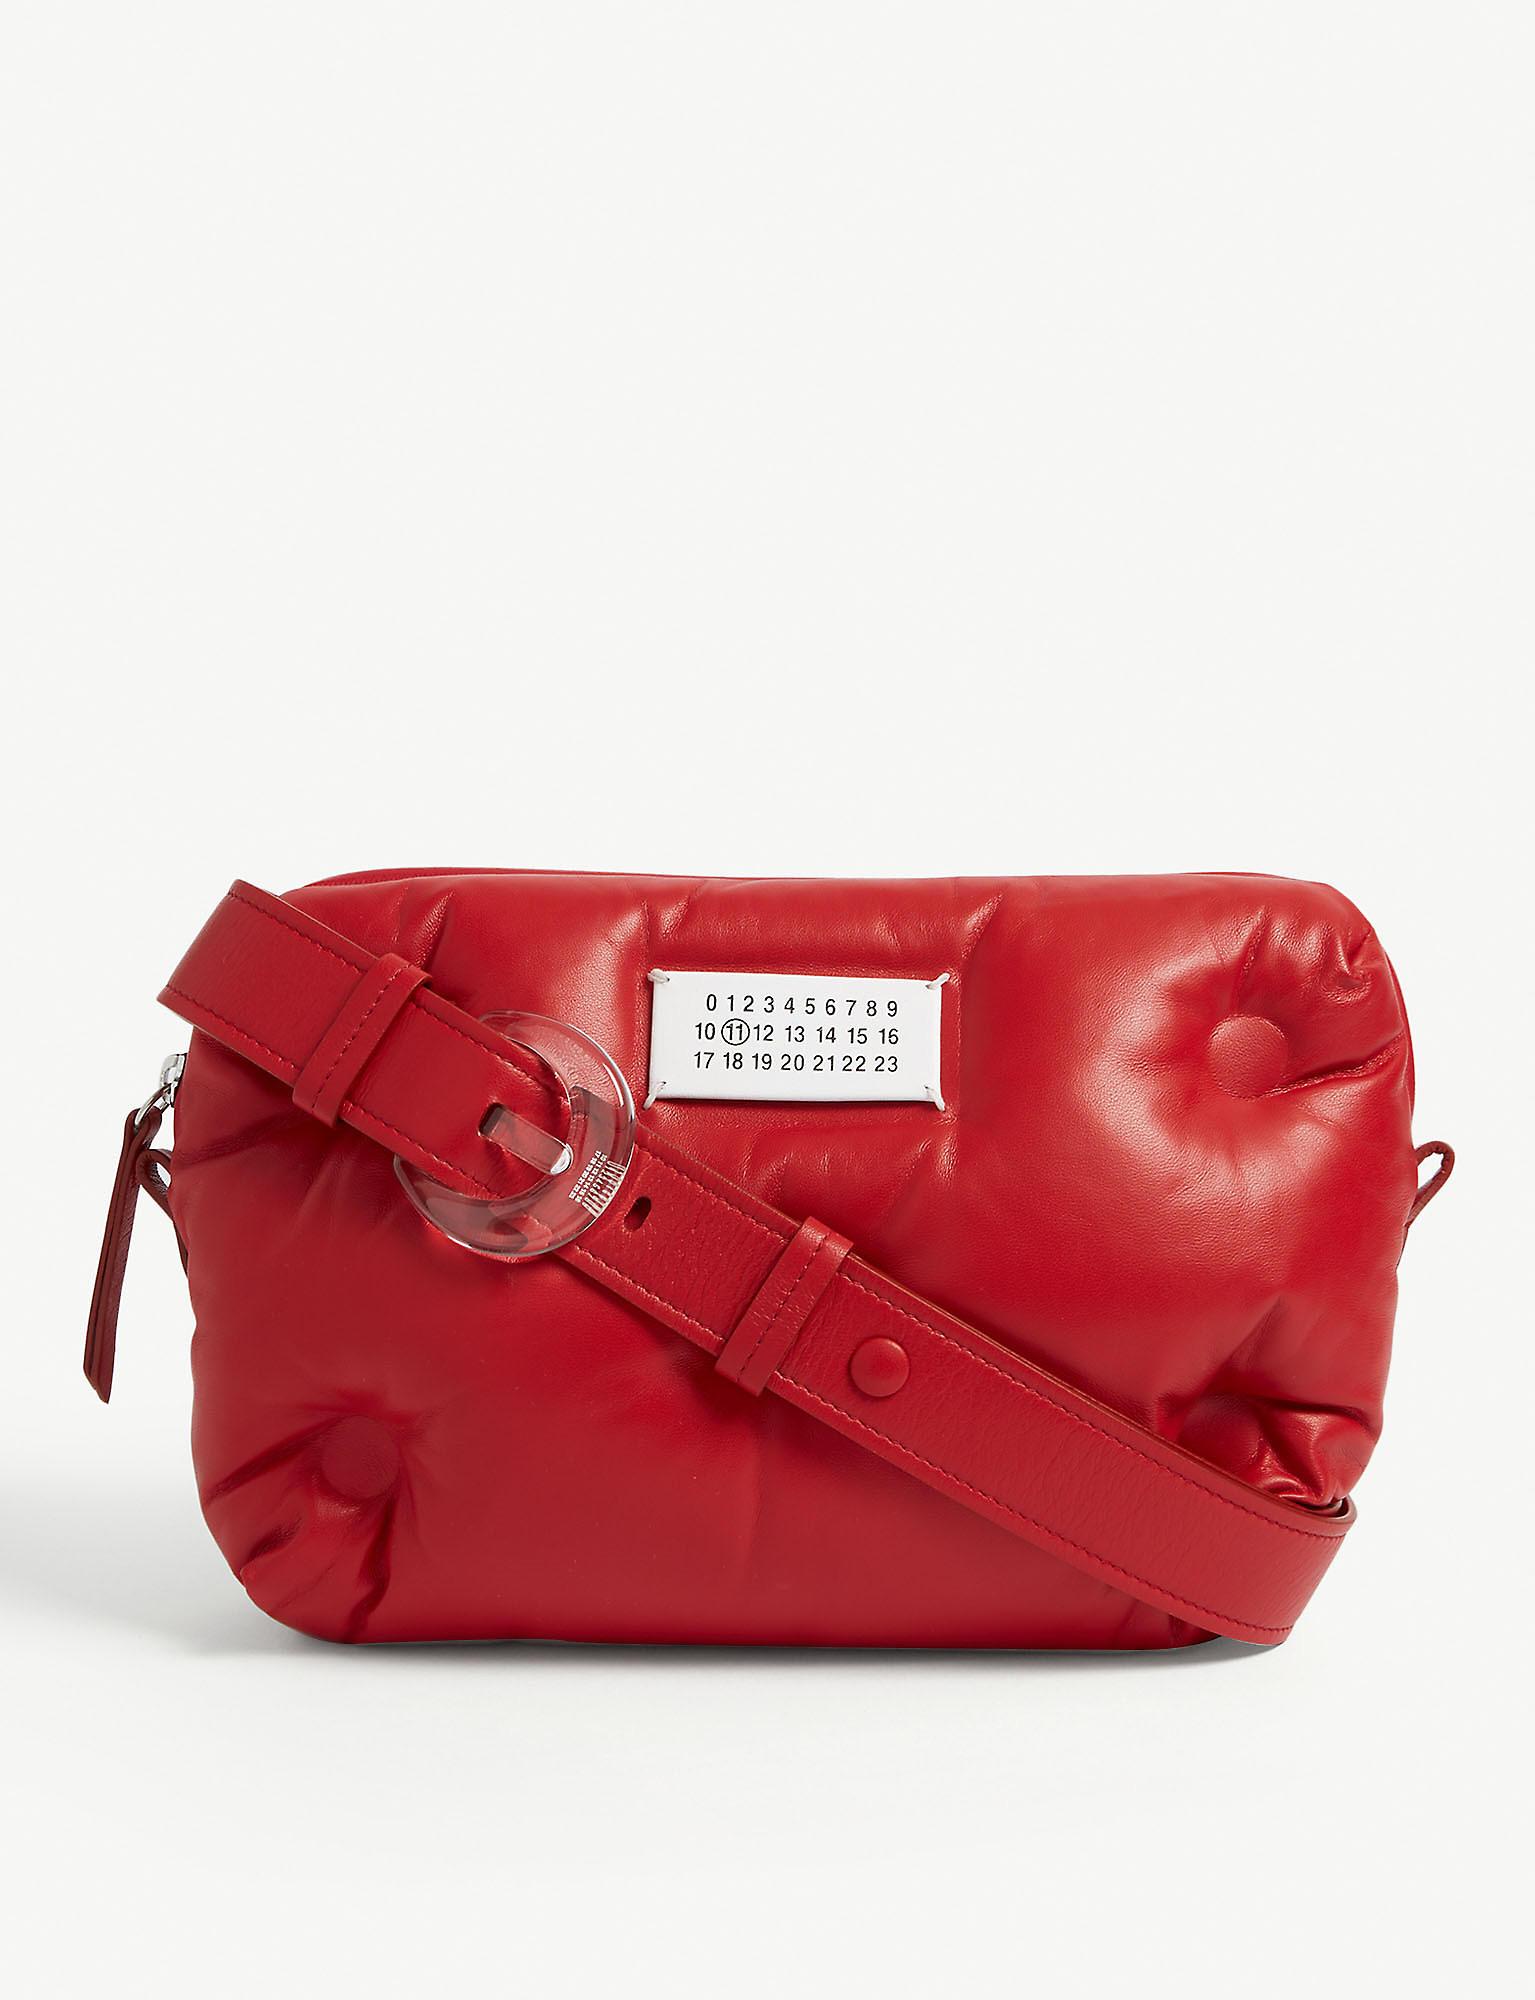 Maison Margiela Pillow Leather Cross Body Bag in Red - Lyst